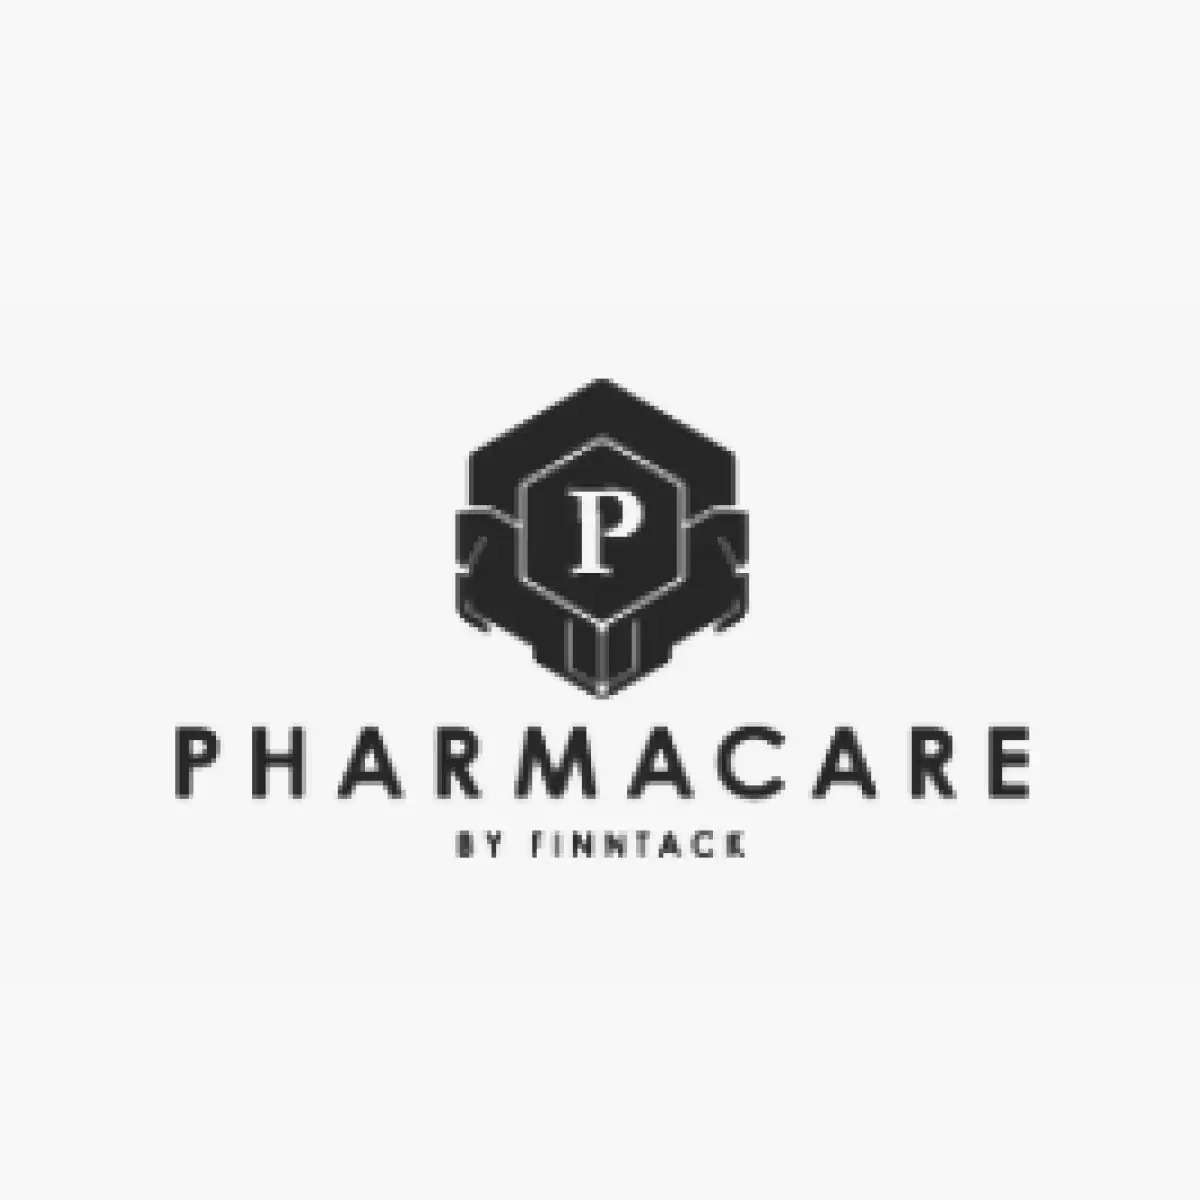 Pharmacare by Finntack